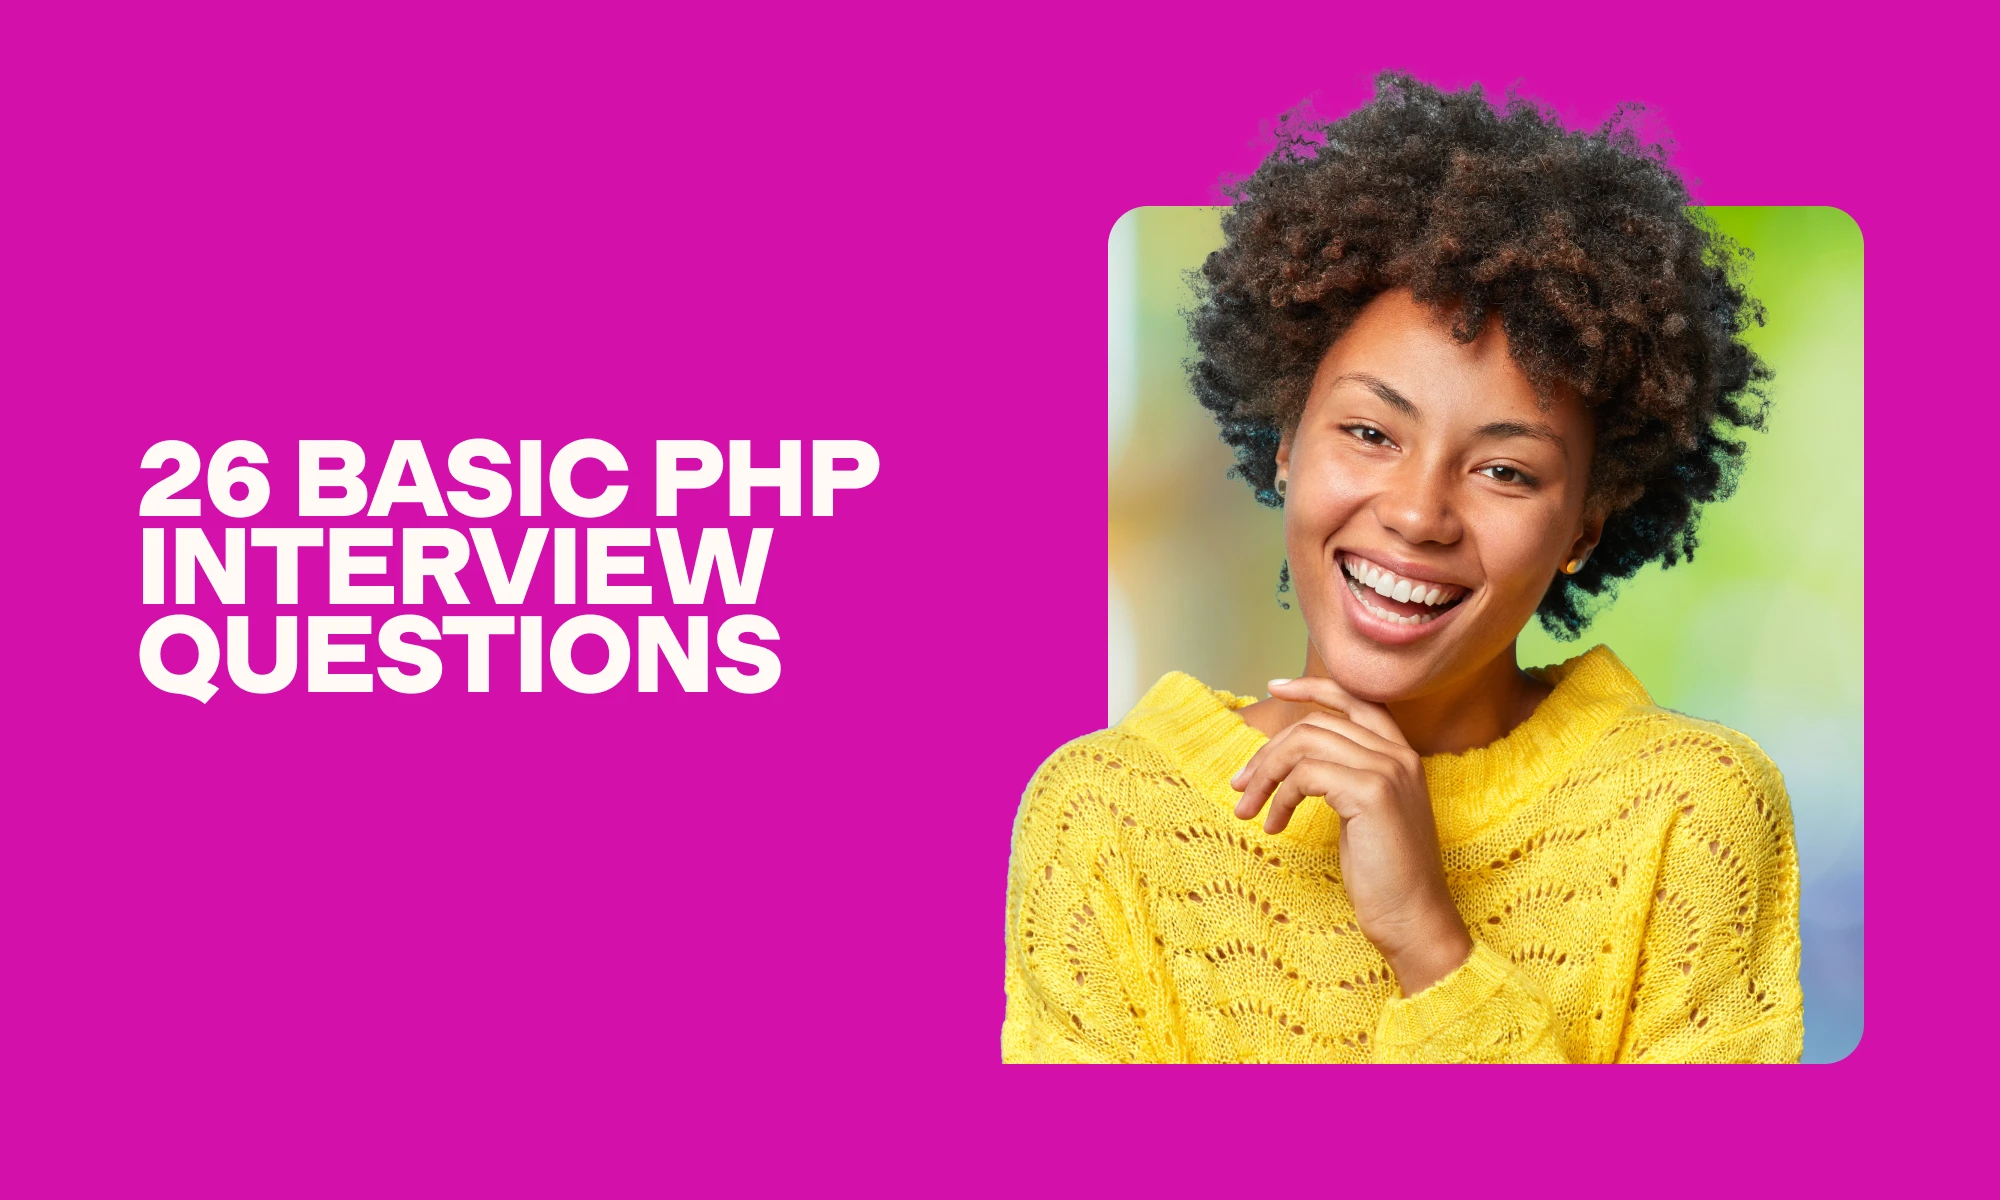 image of basic PHP interview questions